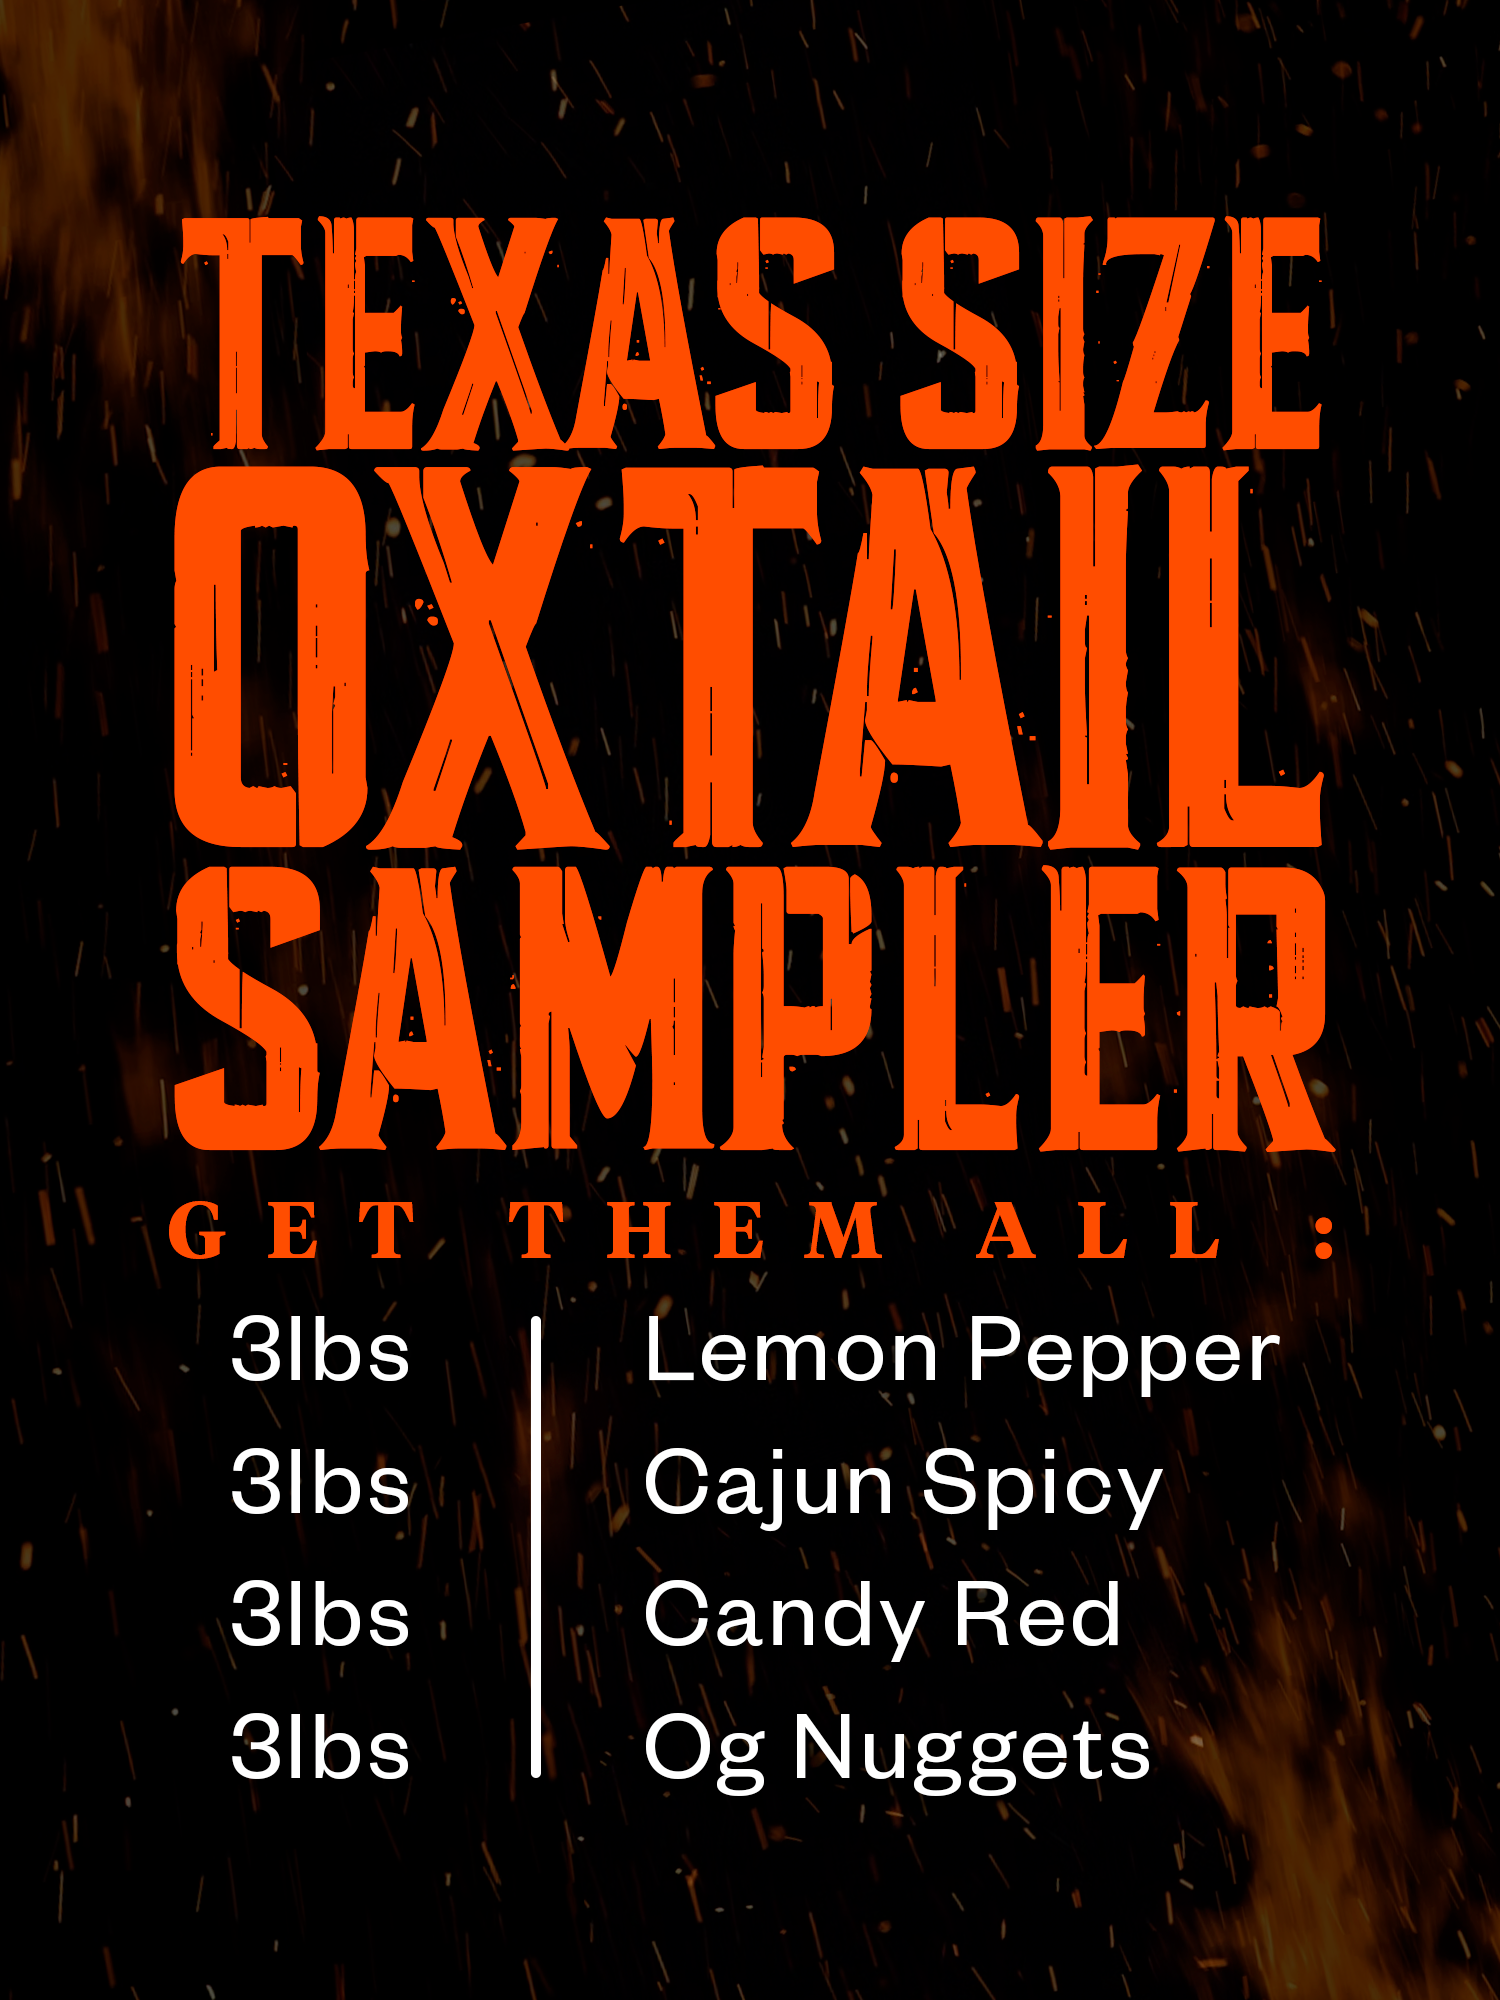 Oxtail Nuggets - Texas Size Sampler Pack